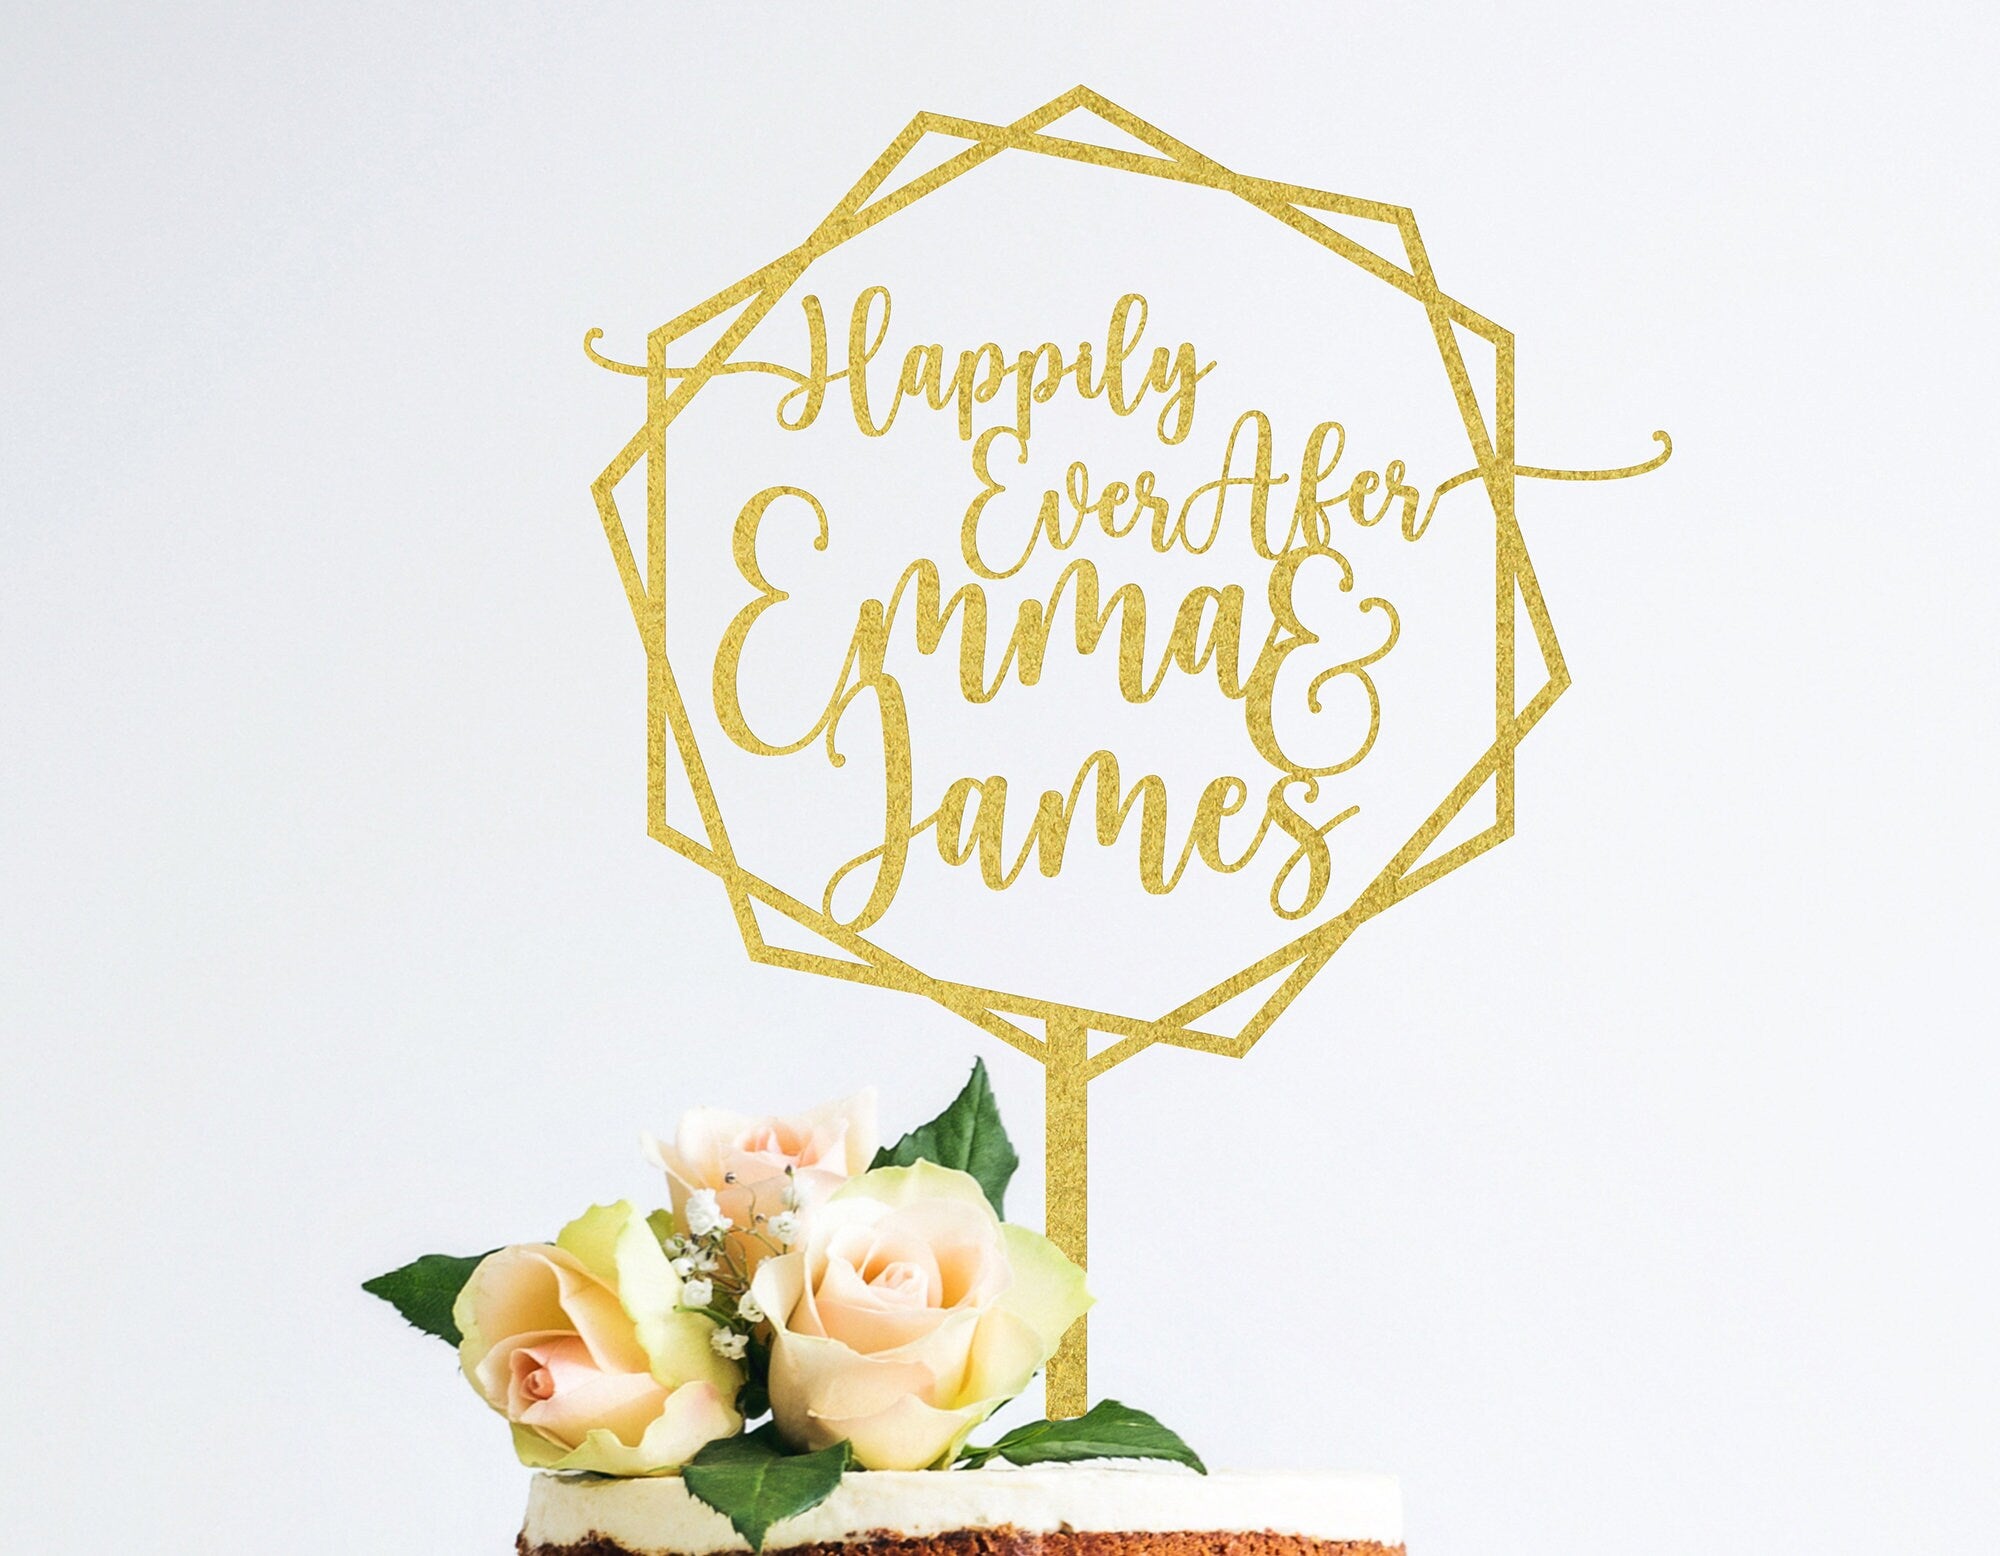 Happily Ever After Hexagon Cake Topper Birthday Party Cake Decoration